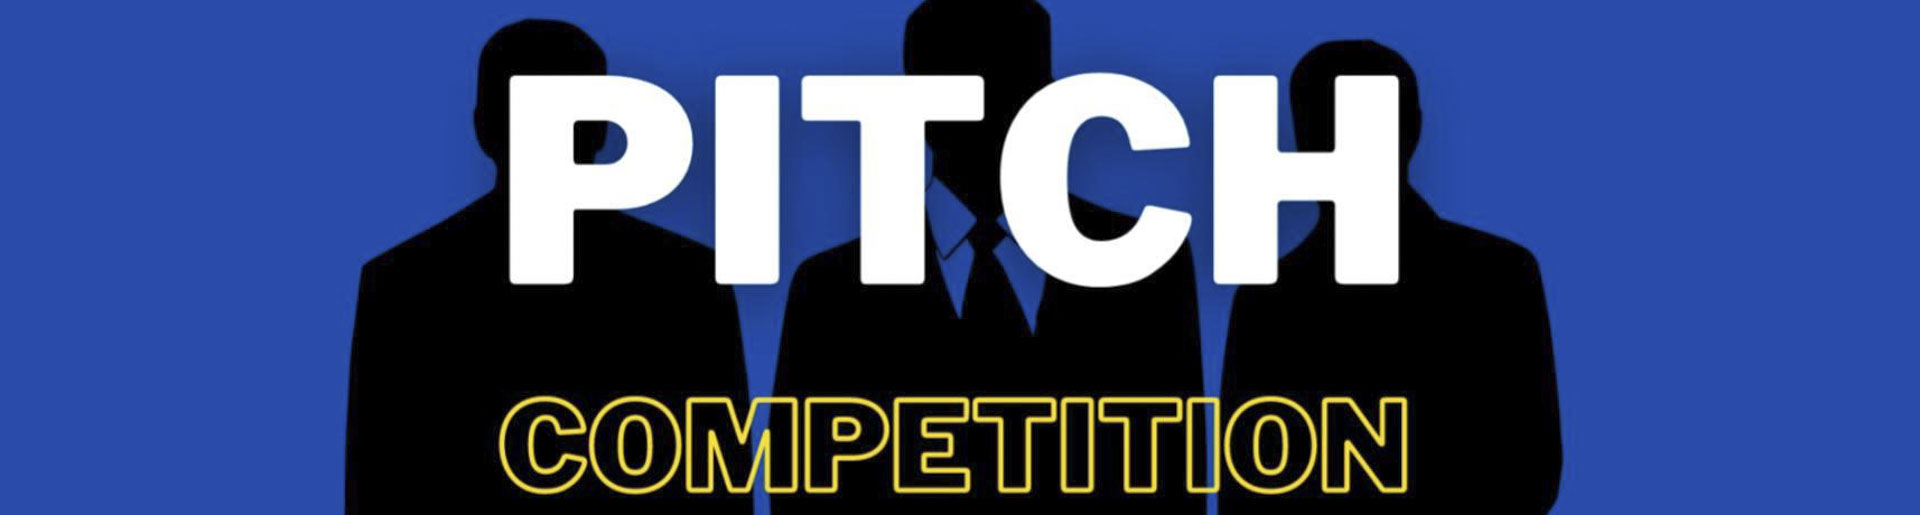 Held annually, The Pitch gives students the chance to showcase their entrepreneurial ideas for cash prizes.